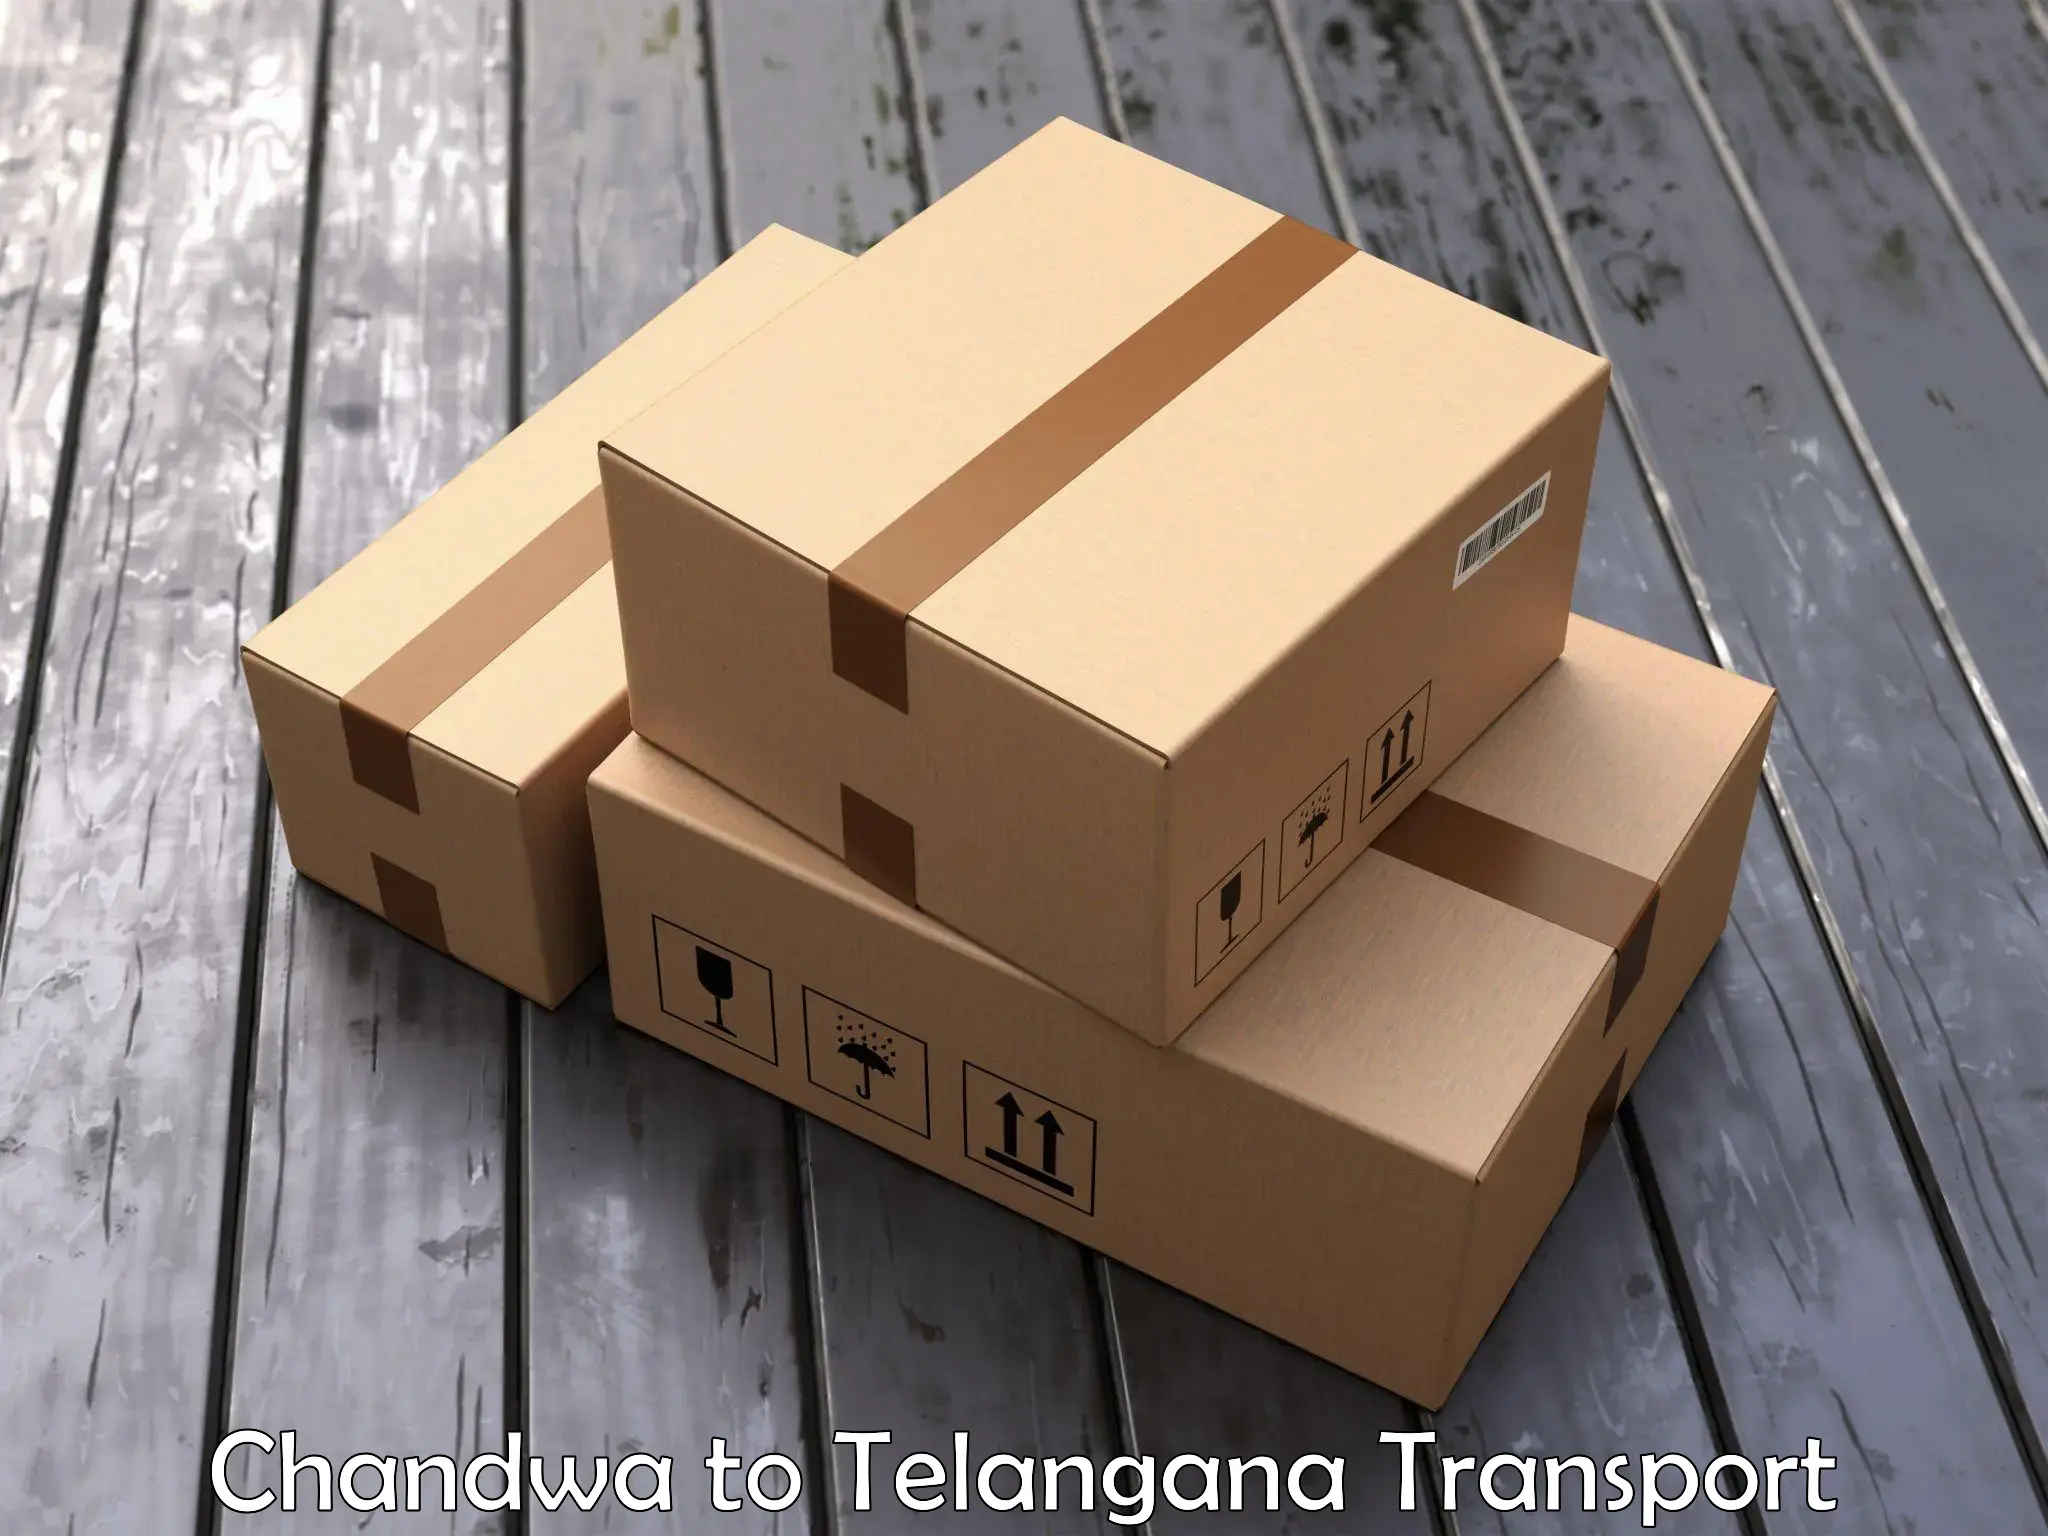 Lorry transport service Chandwa to Dornakal